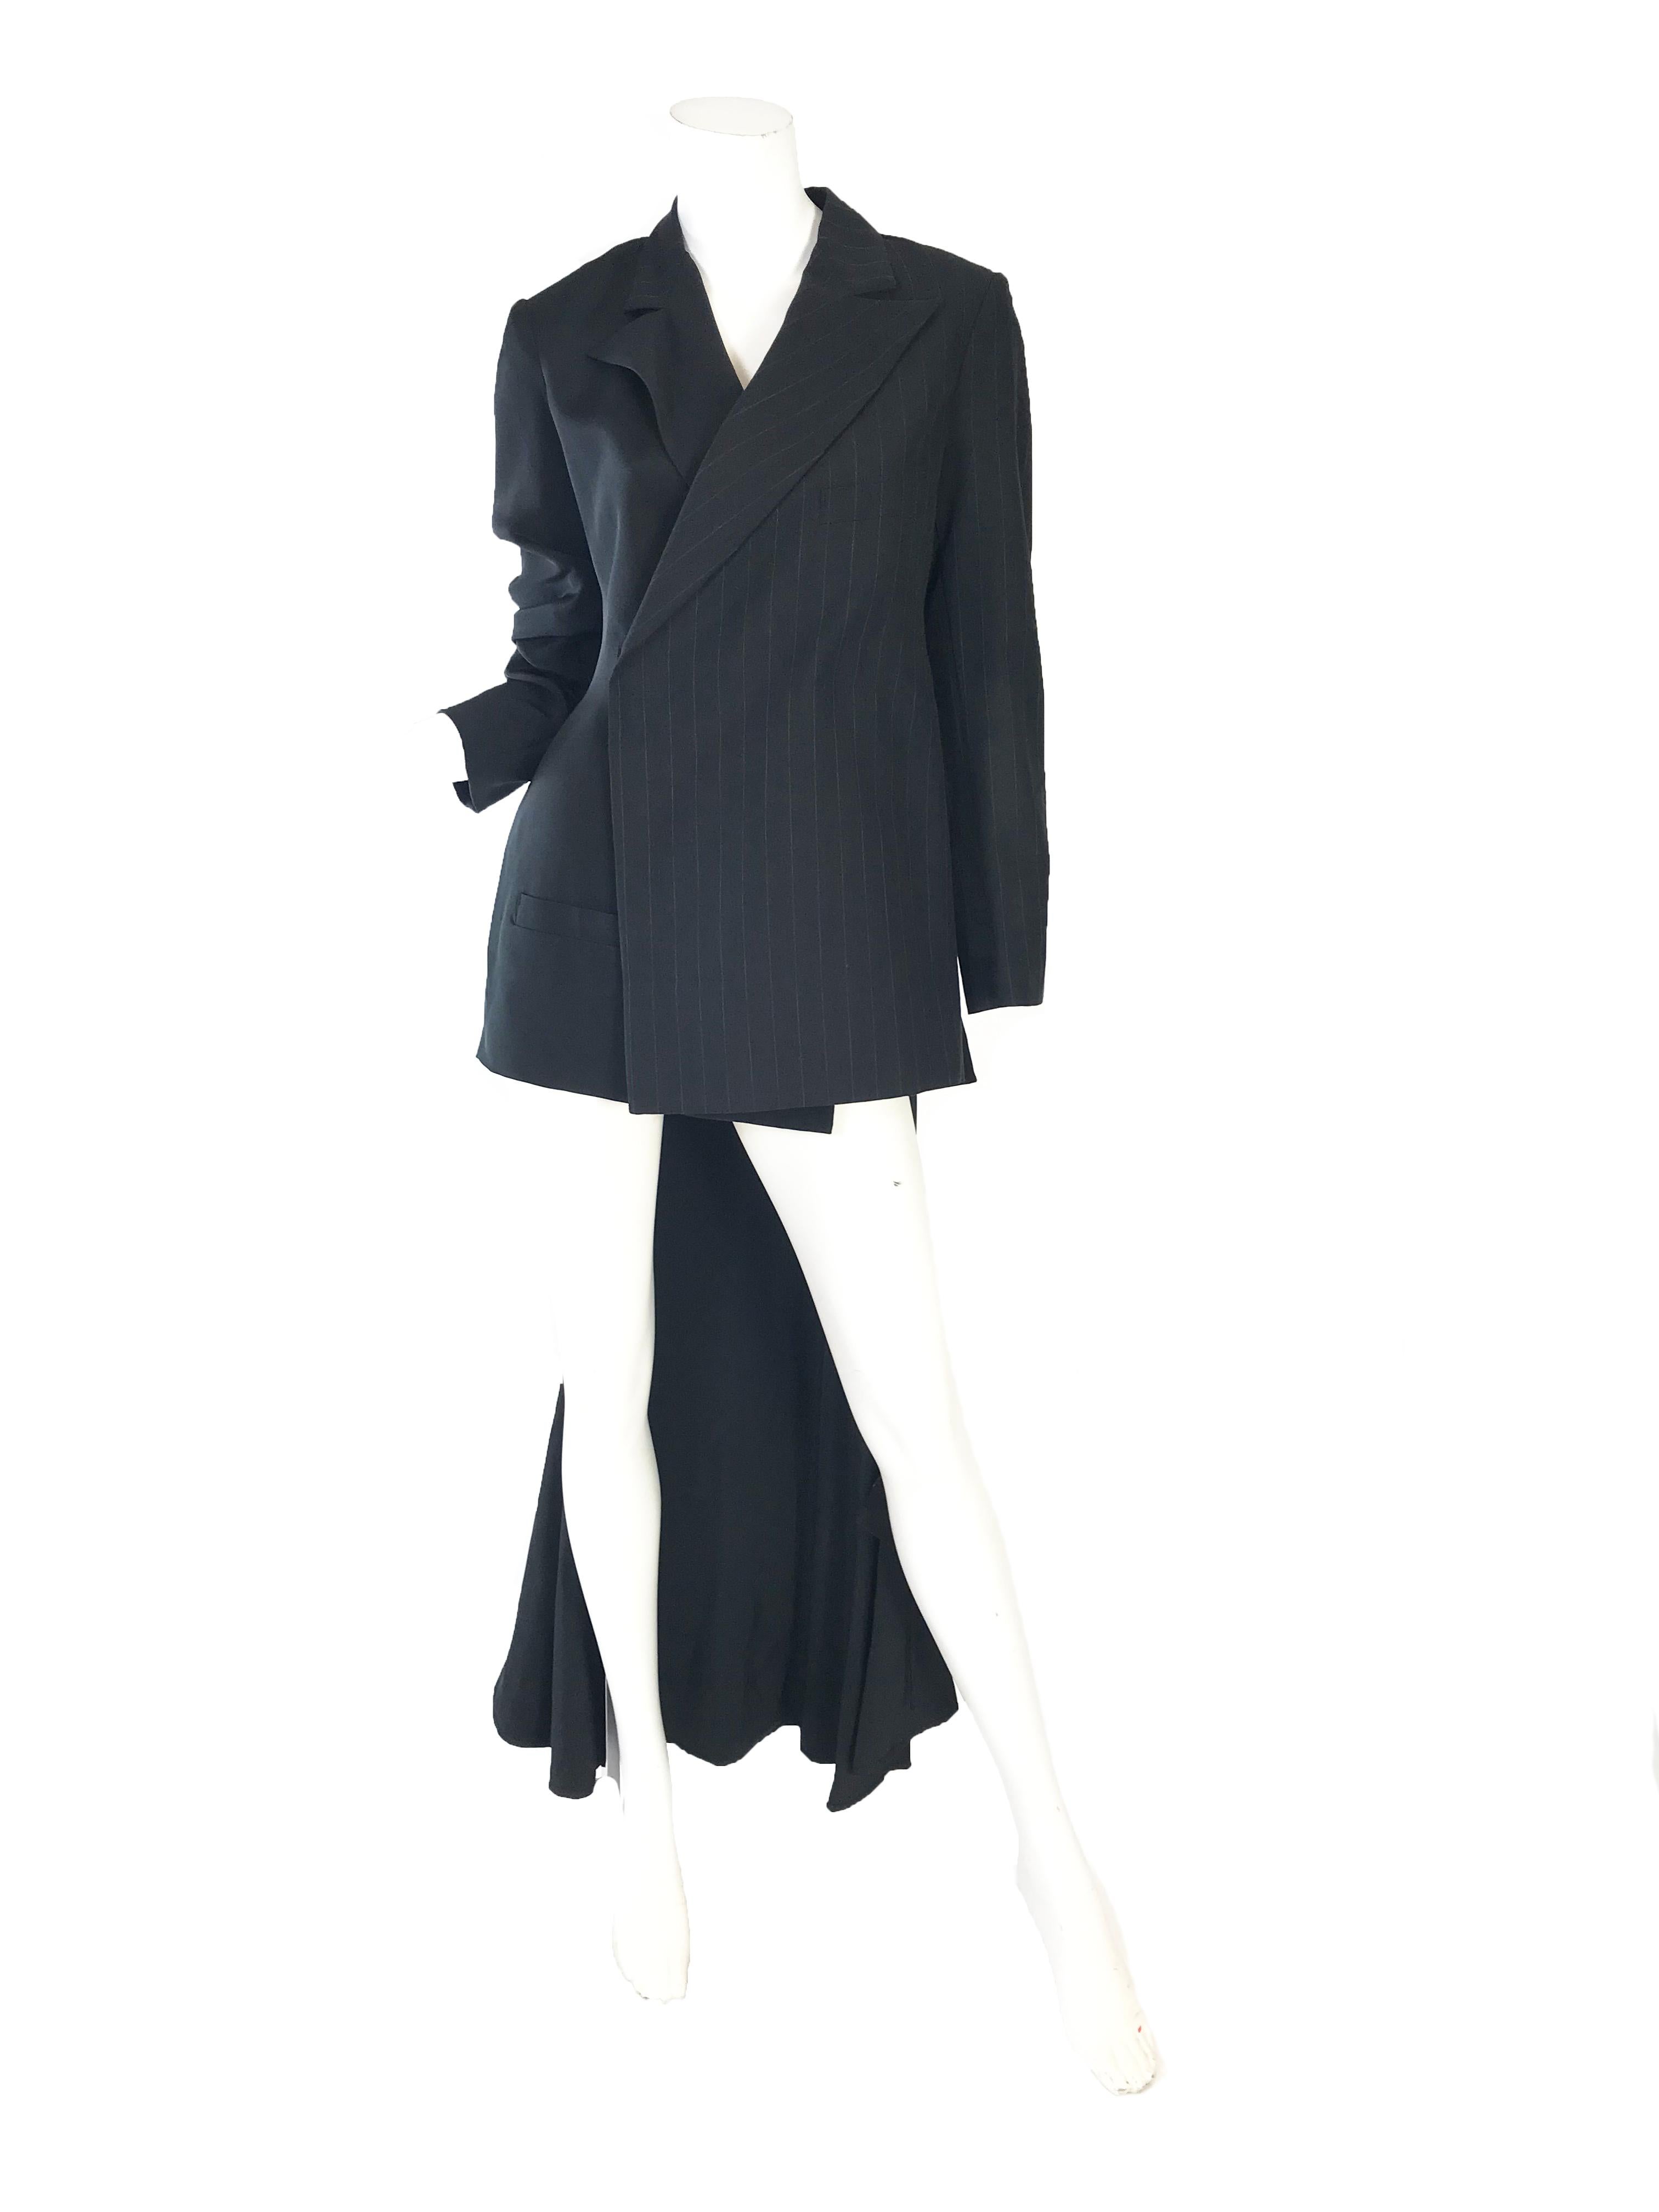 1990s Yohji Yamamoto black blazer with tails with black chiffon wrap skirt.

Made in Japan
Condition: Excellent
labeled size 2 or Medium ( mannequin is a US size 6 ) 